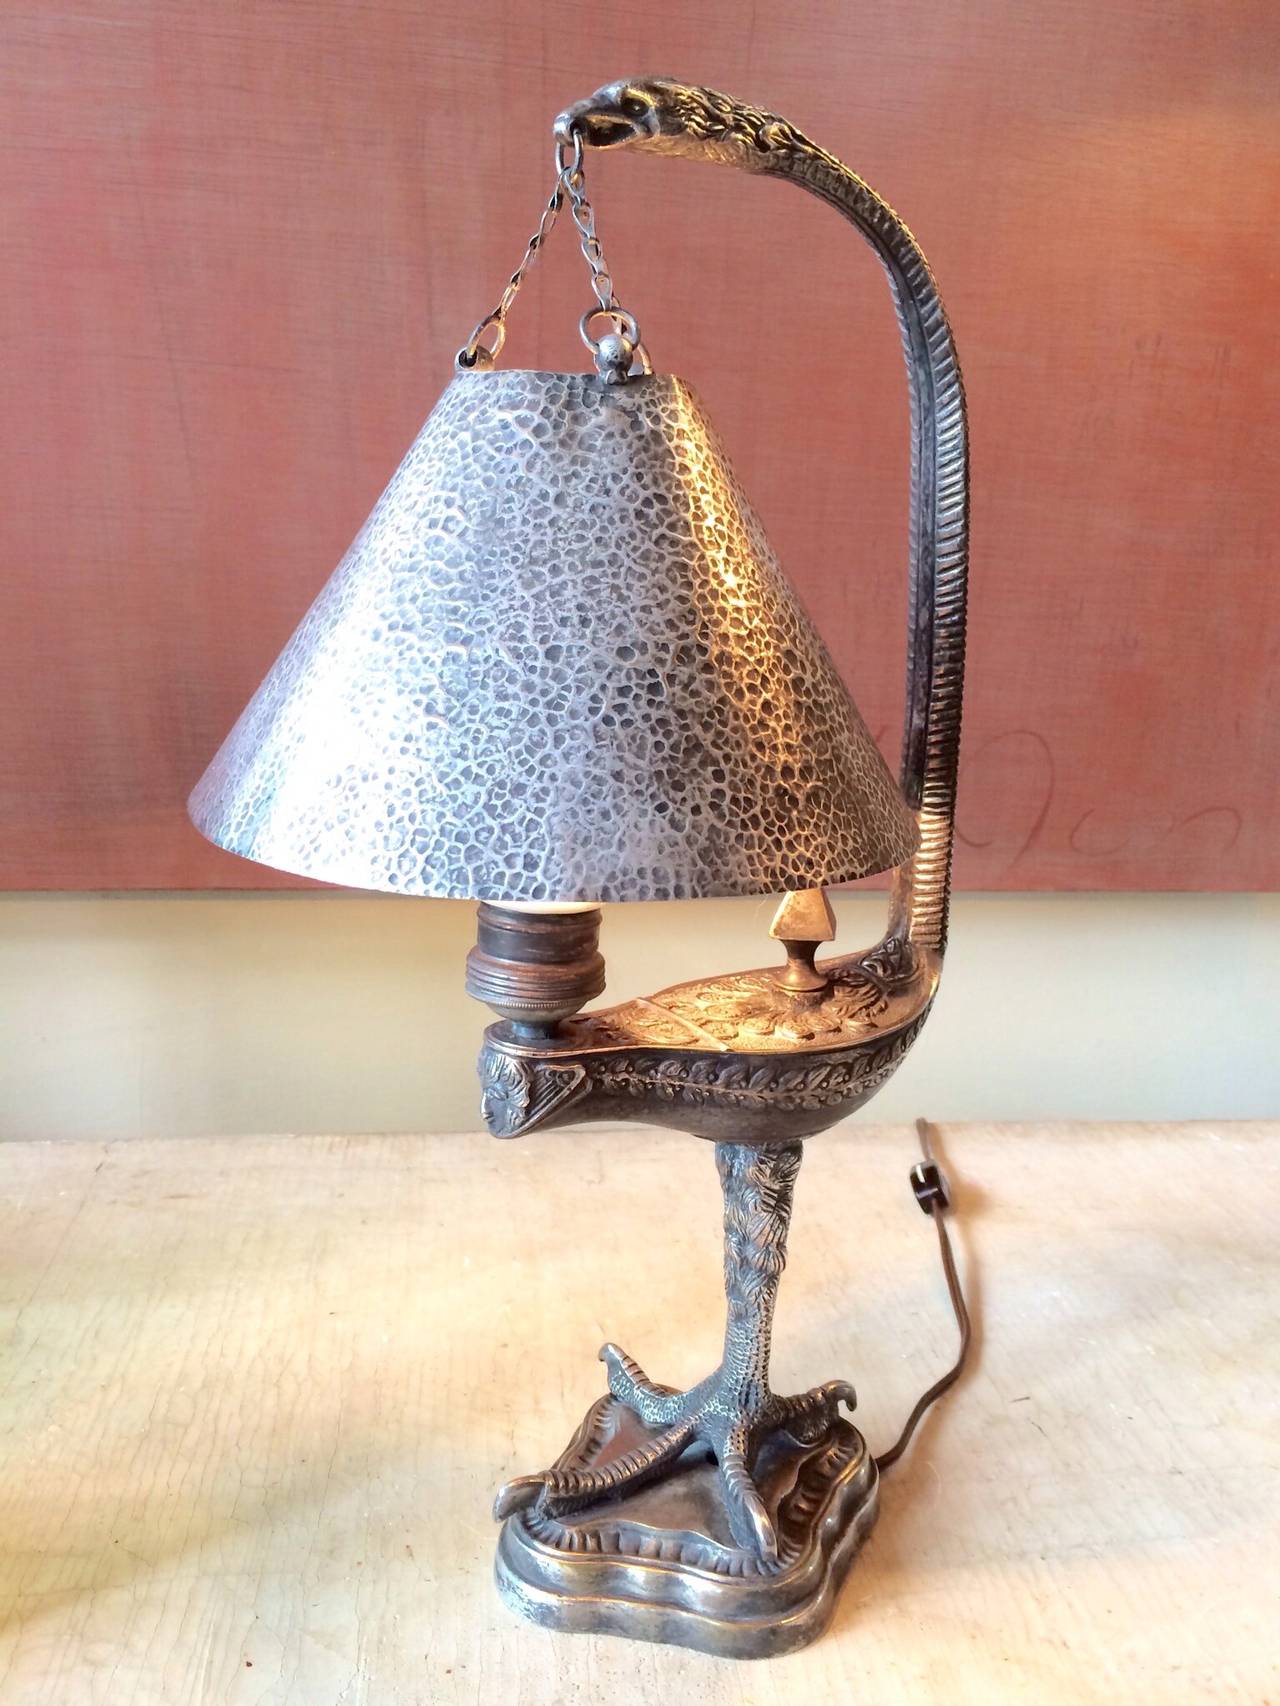 A rare neoclassic silver over brass whale oil form lamp mounted on eagle talon footed base with hand hammered shade suspended by chain from an eagle headed serpent form handle concealing a single Edison socket. Vintage electrical wire in excellent